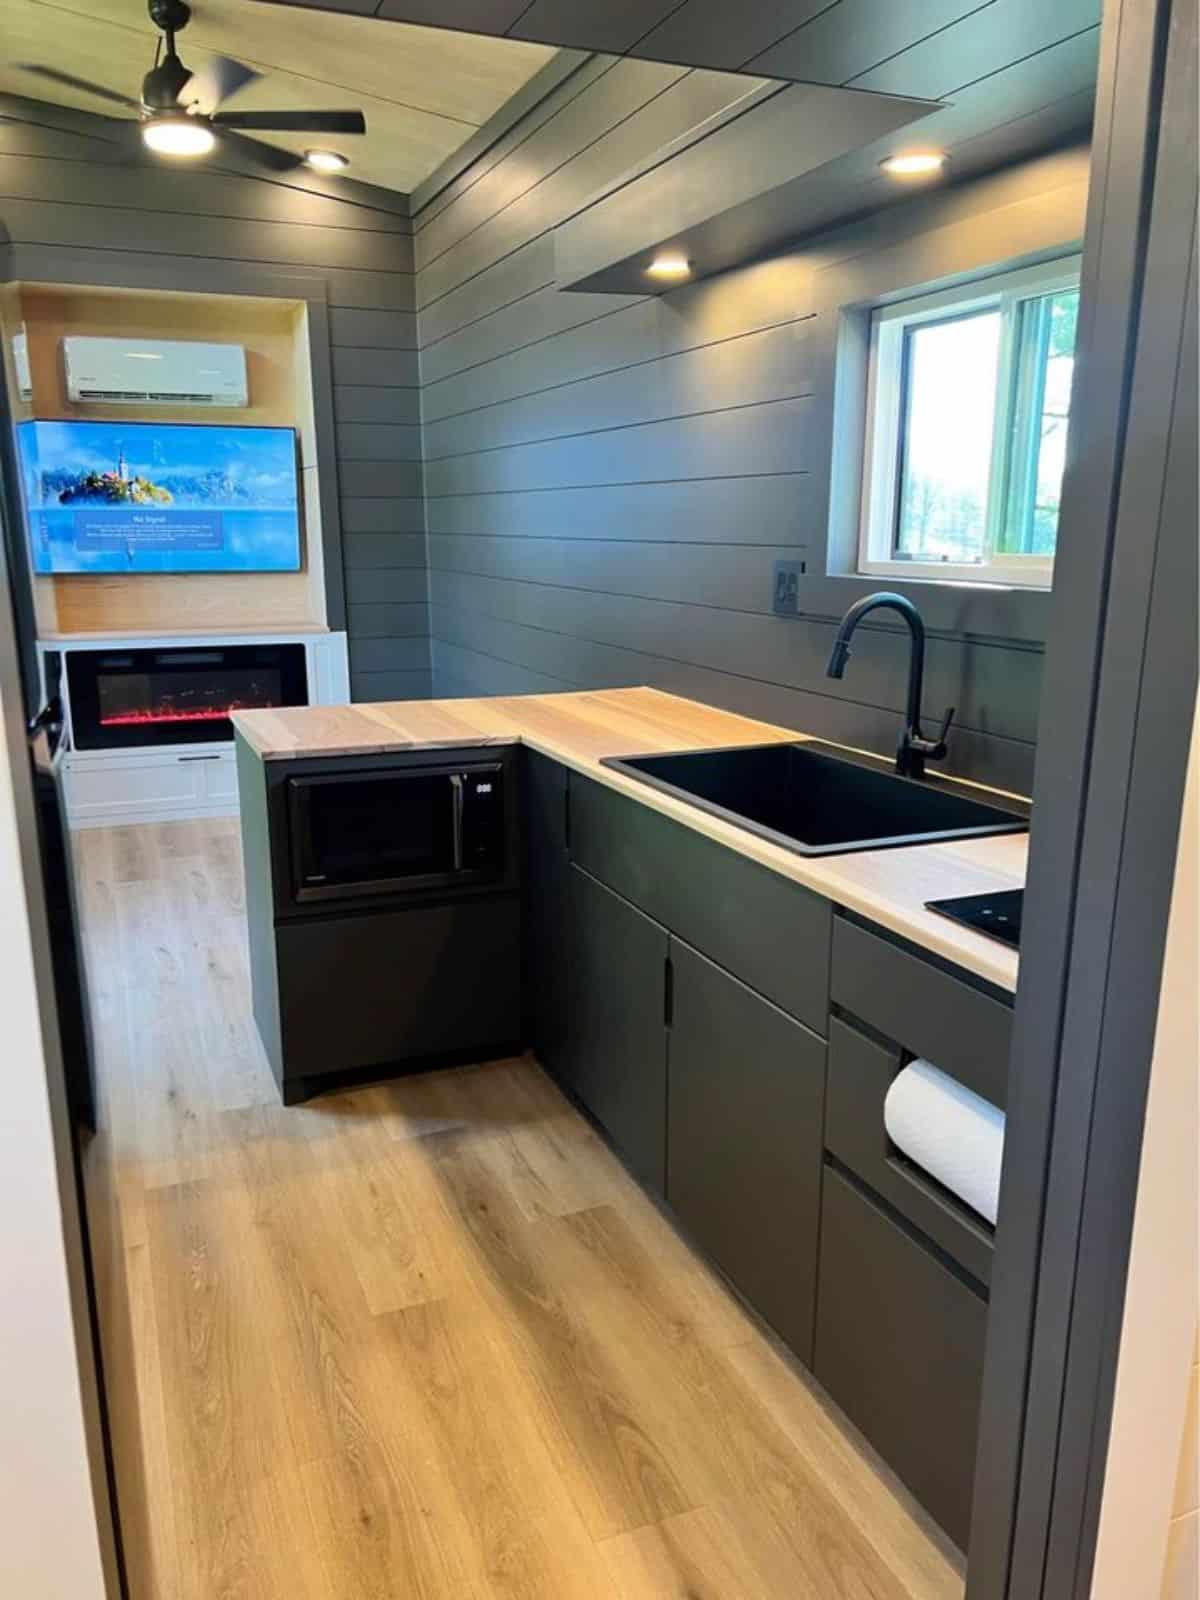 L shaped kitchen countertop in kitchen area of beautiful tiny home